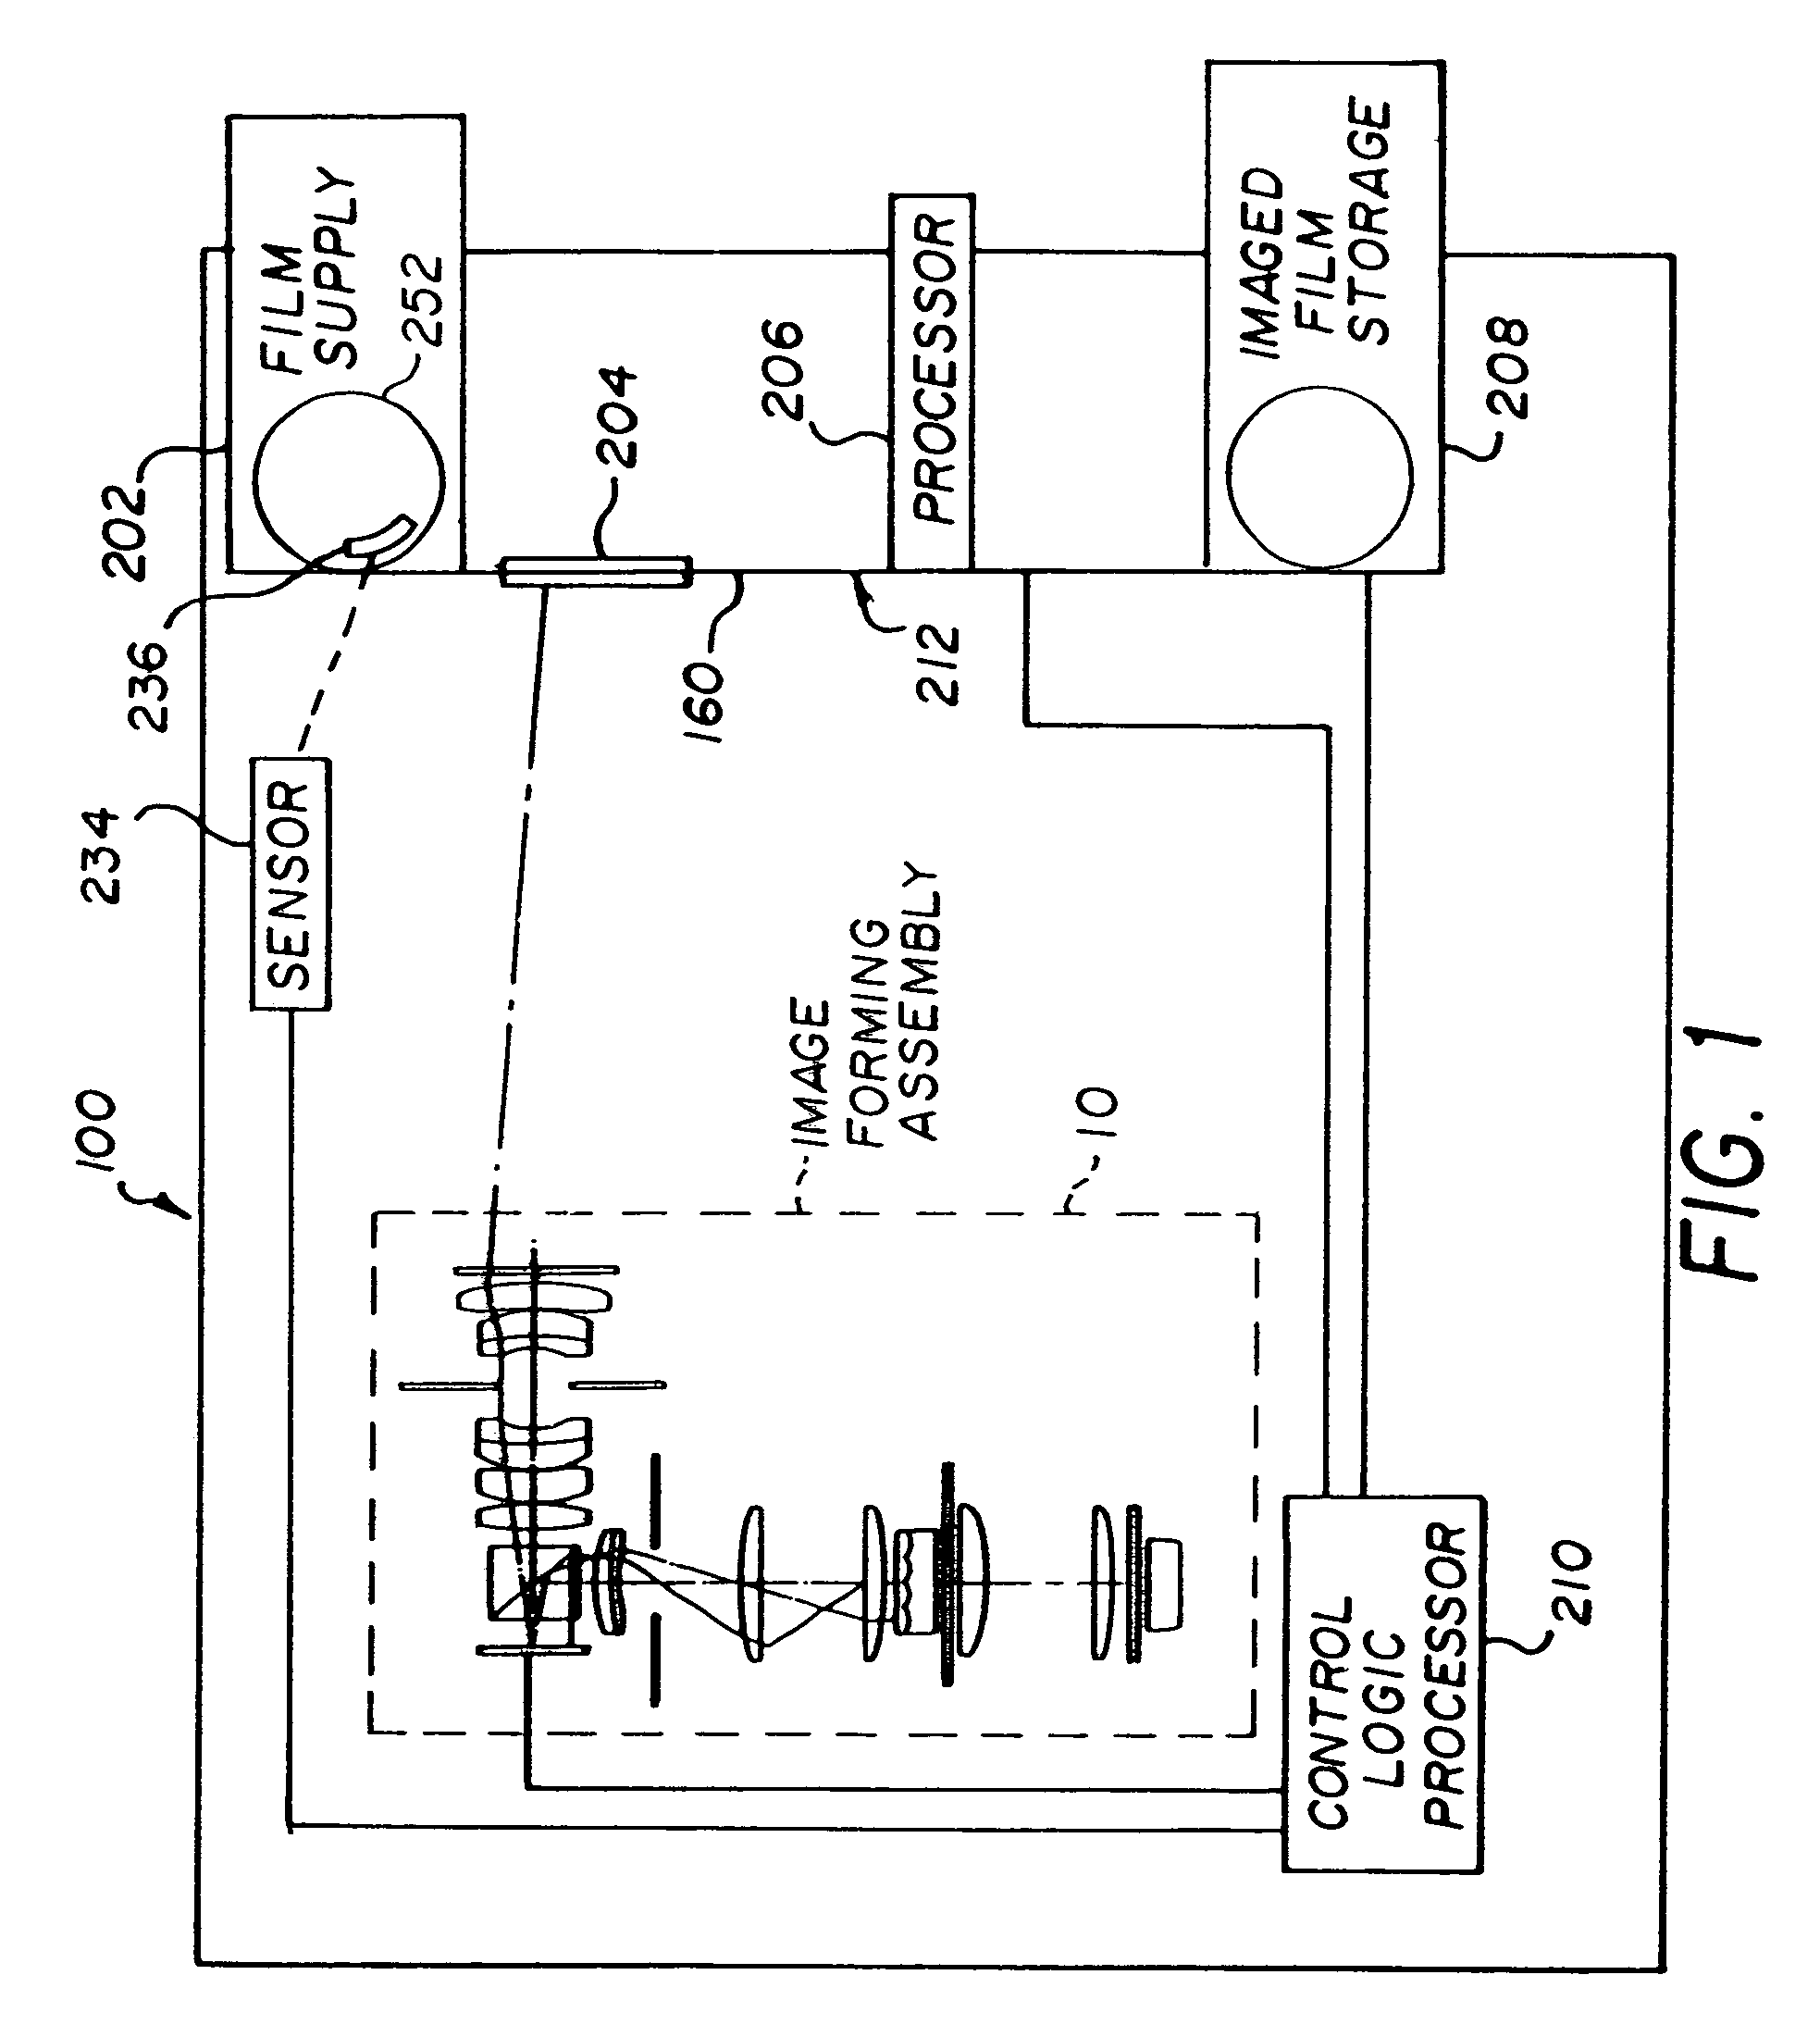 Method and apparatus for printing images from digital image data